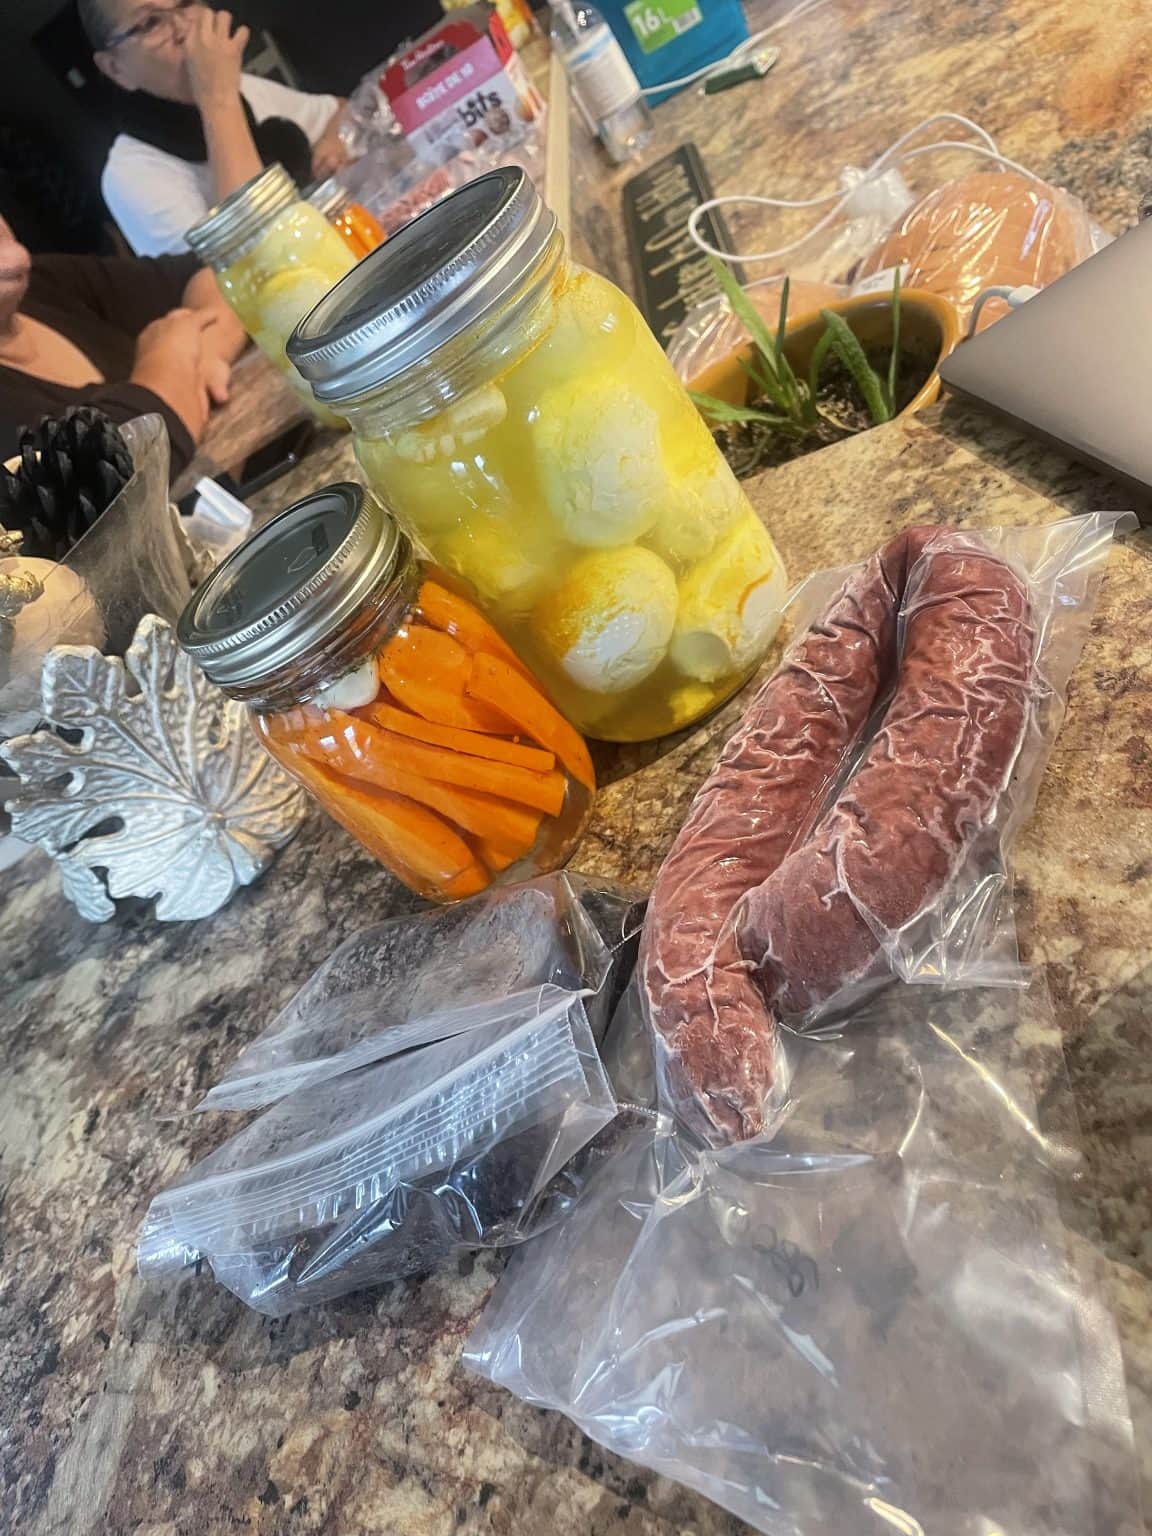 Canned carrots and garlic, and sausages in packaging